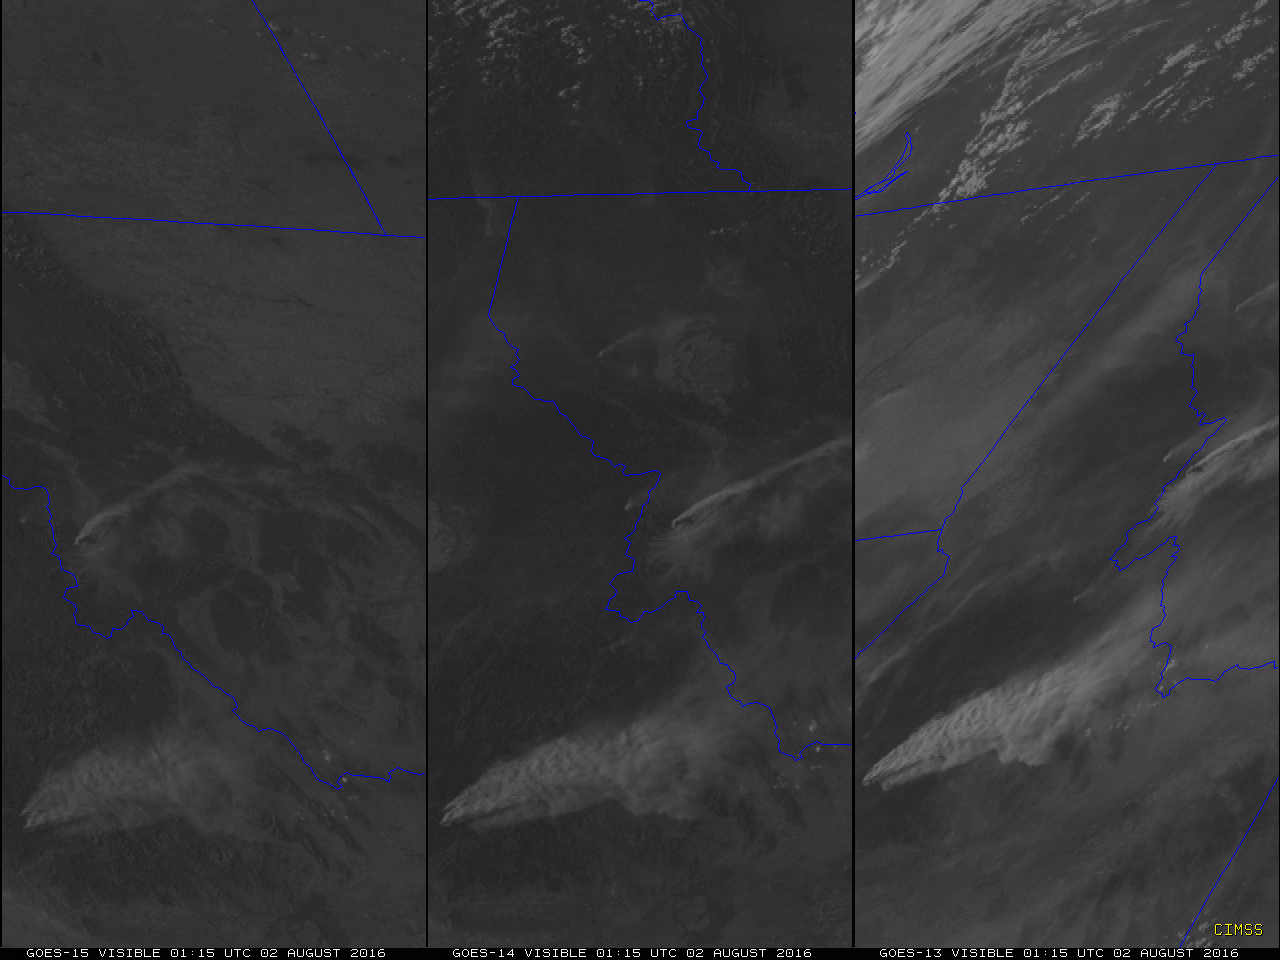 GOES-15 (left), GOES-14 (center) and GOES-13 (right) Visible (0.63 µm) images [click to play animation]